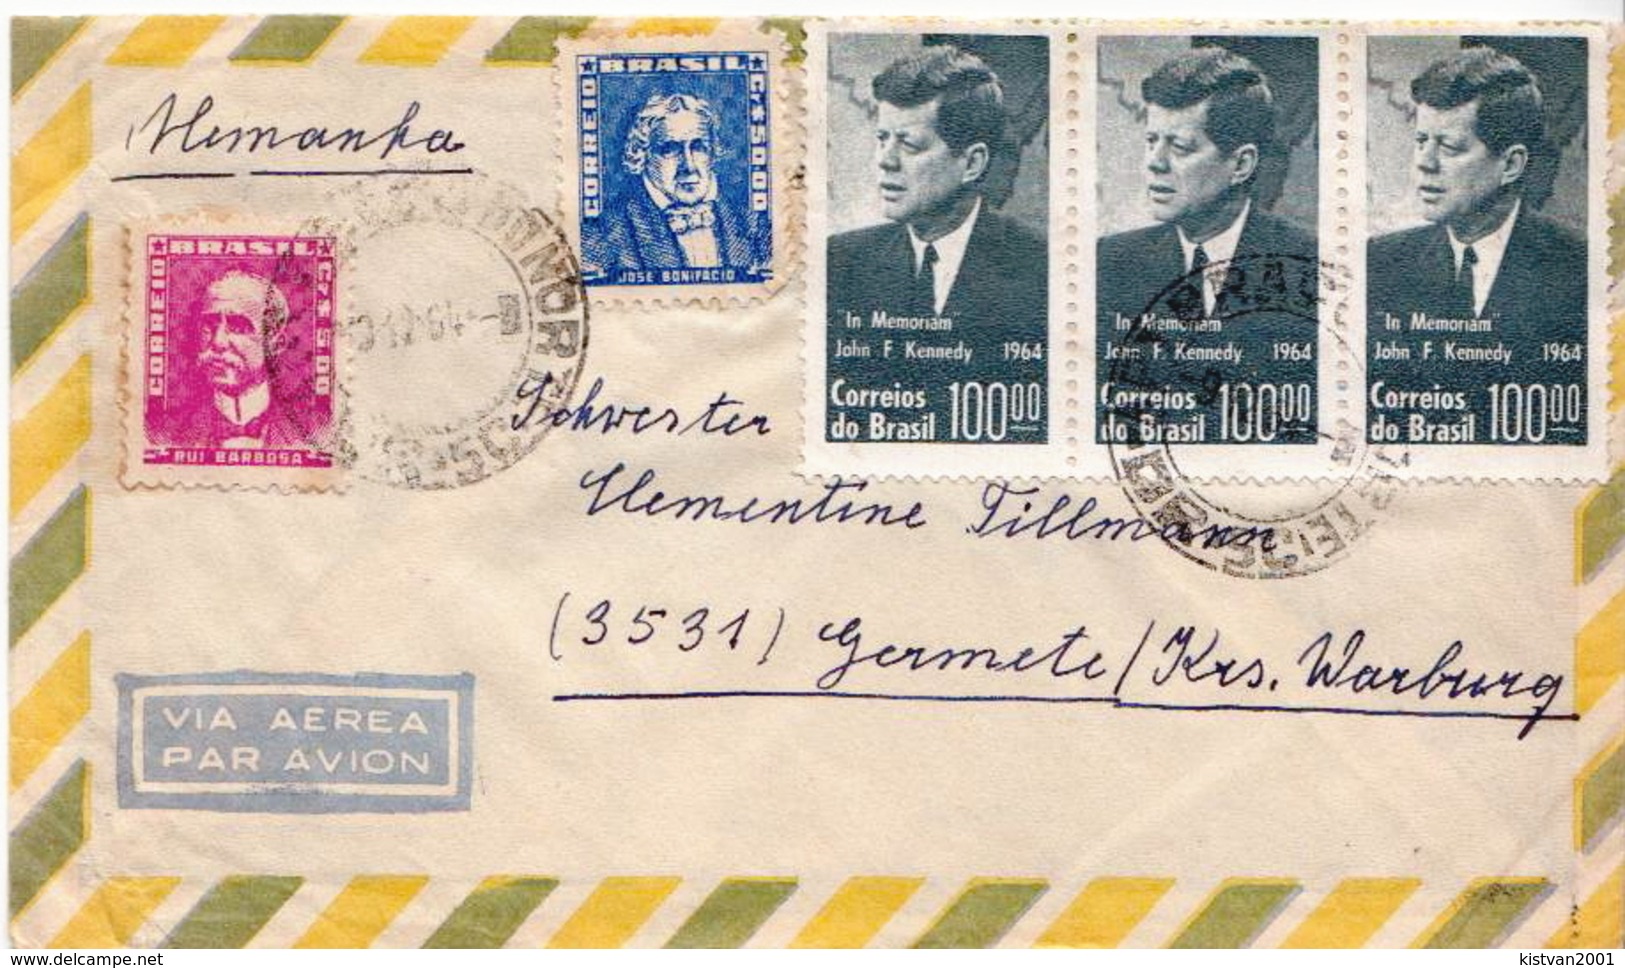 Postal History Cover: Brazil Stamps On Cover - Kennedy (John F.)